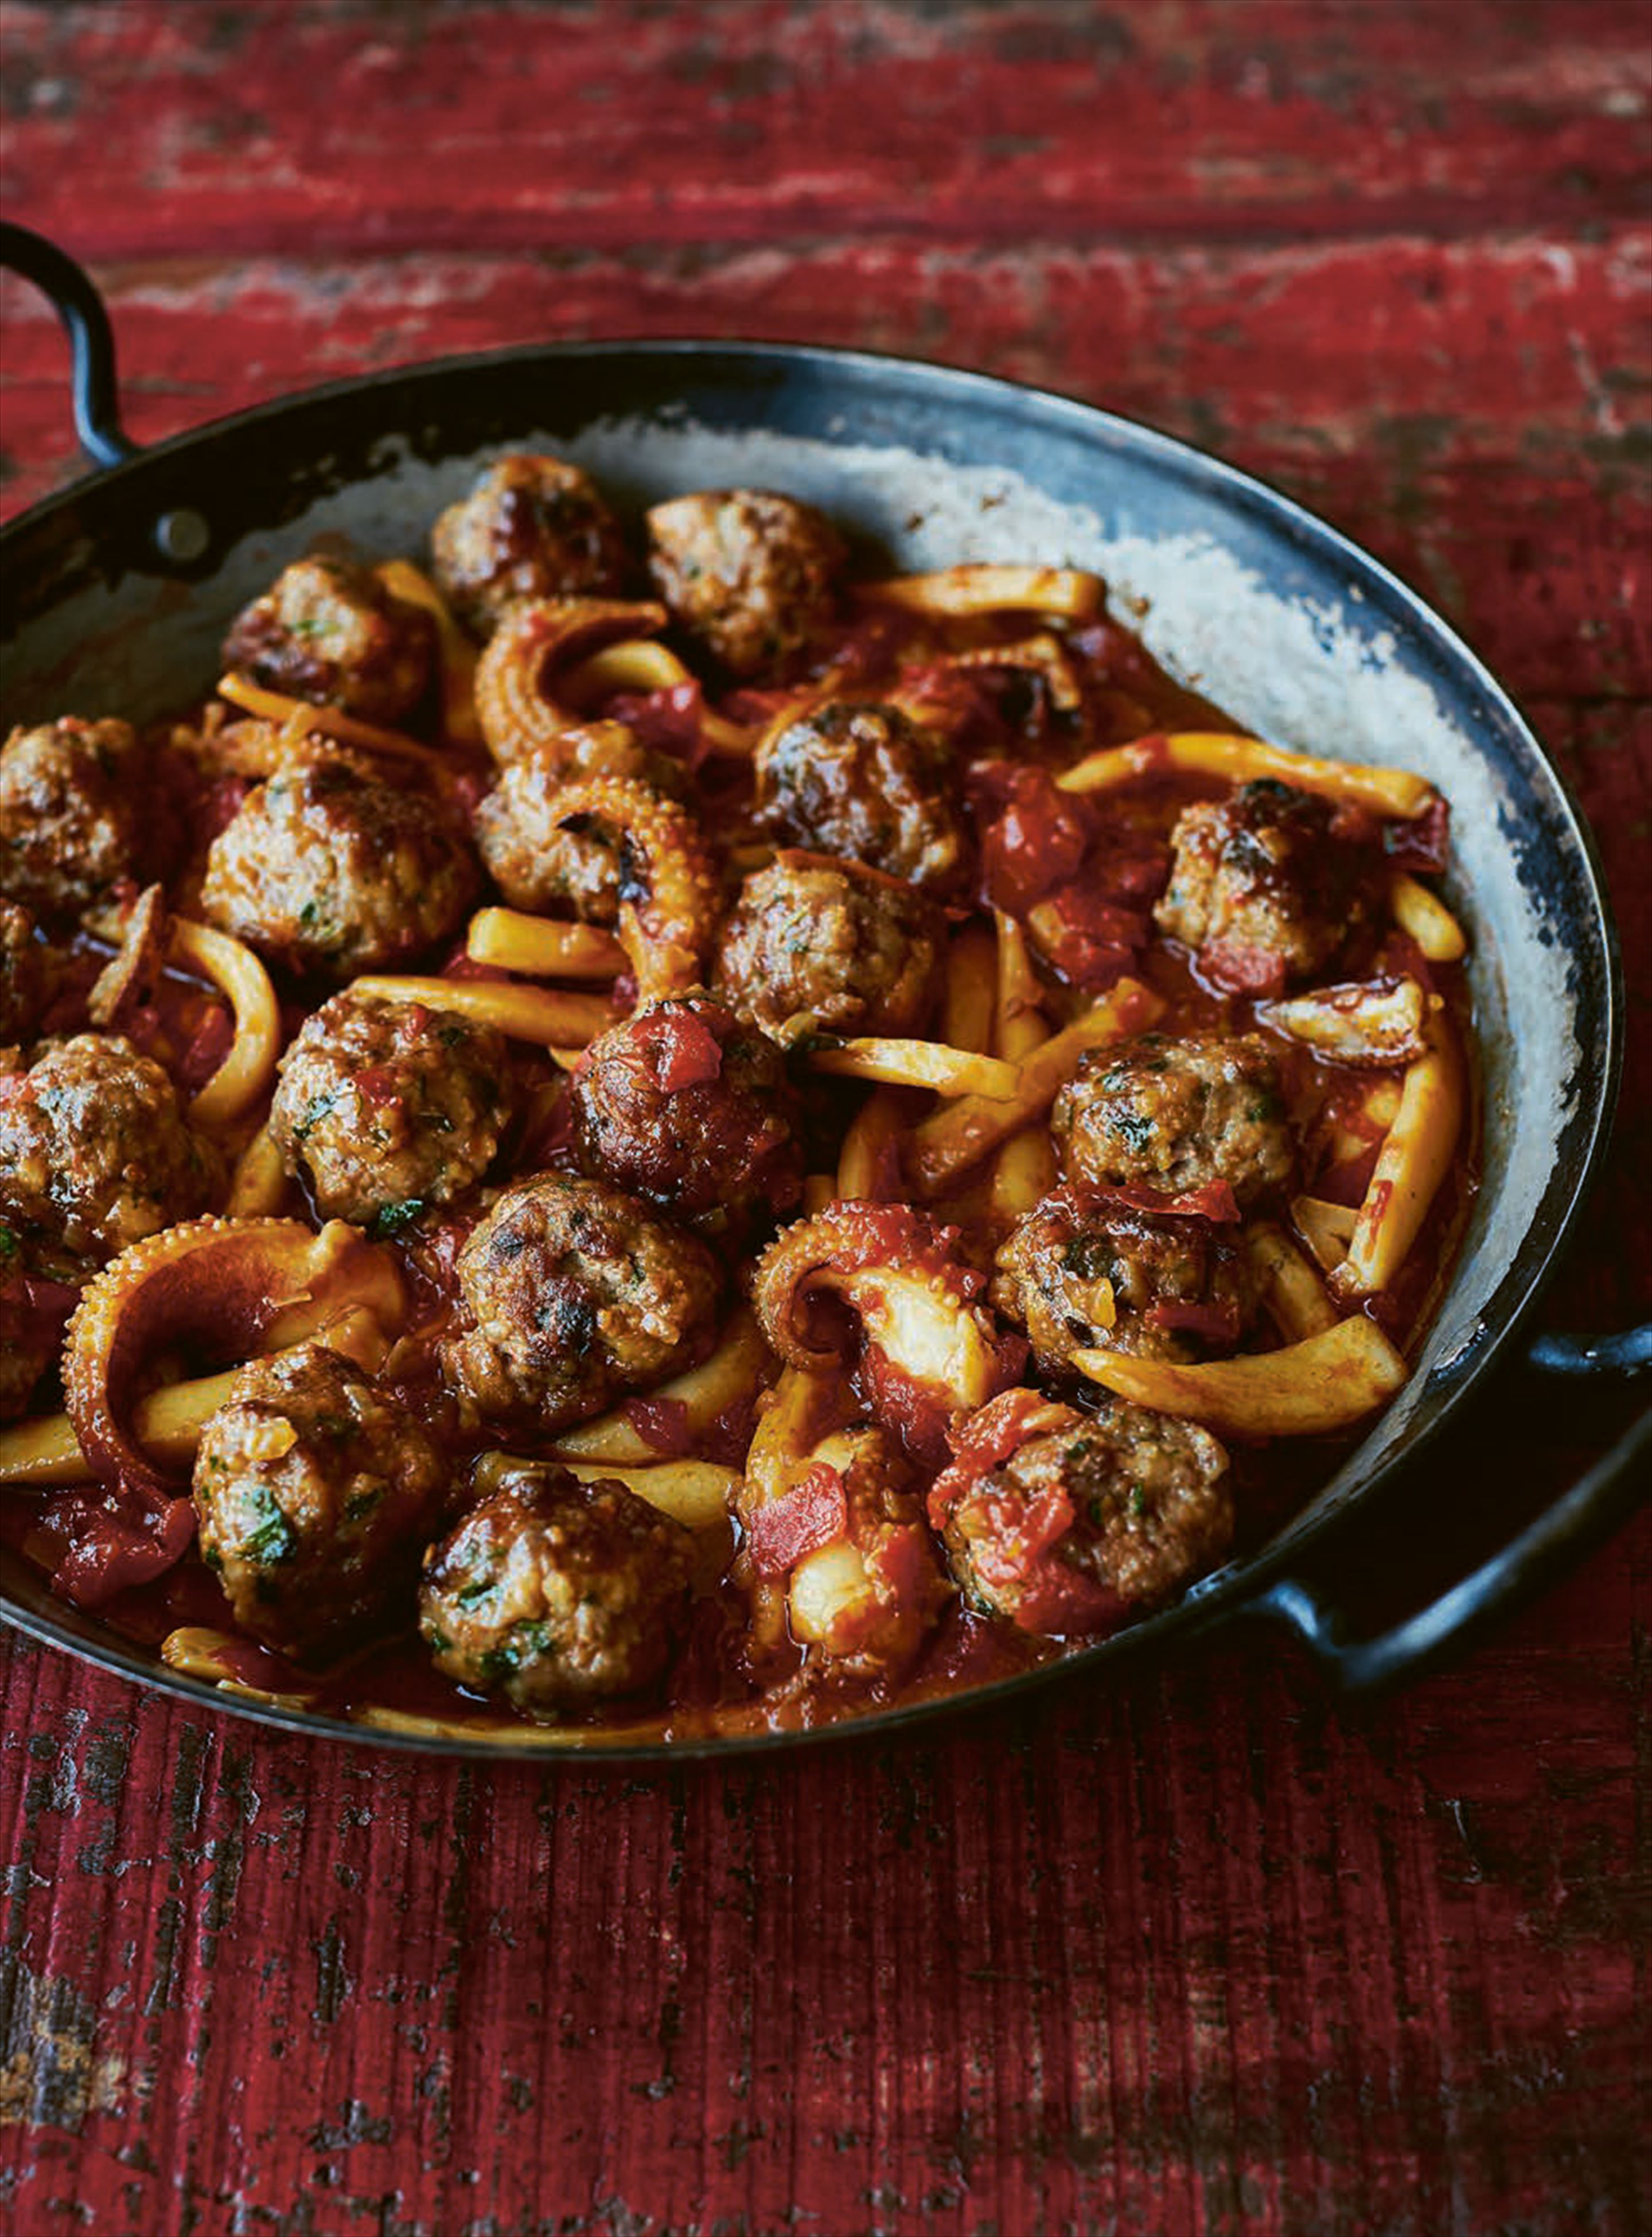 Meatballs with cuttlefish